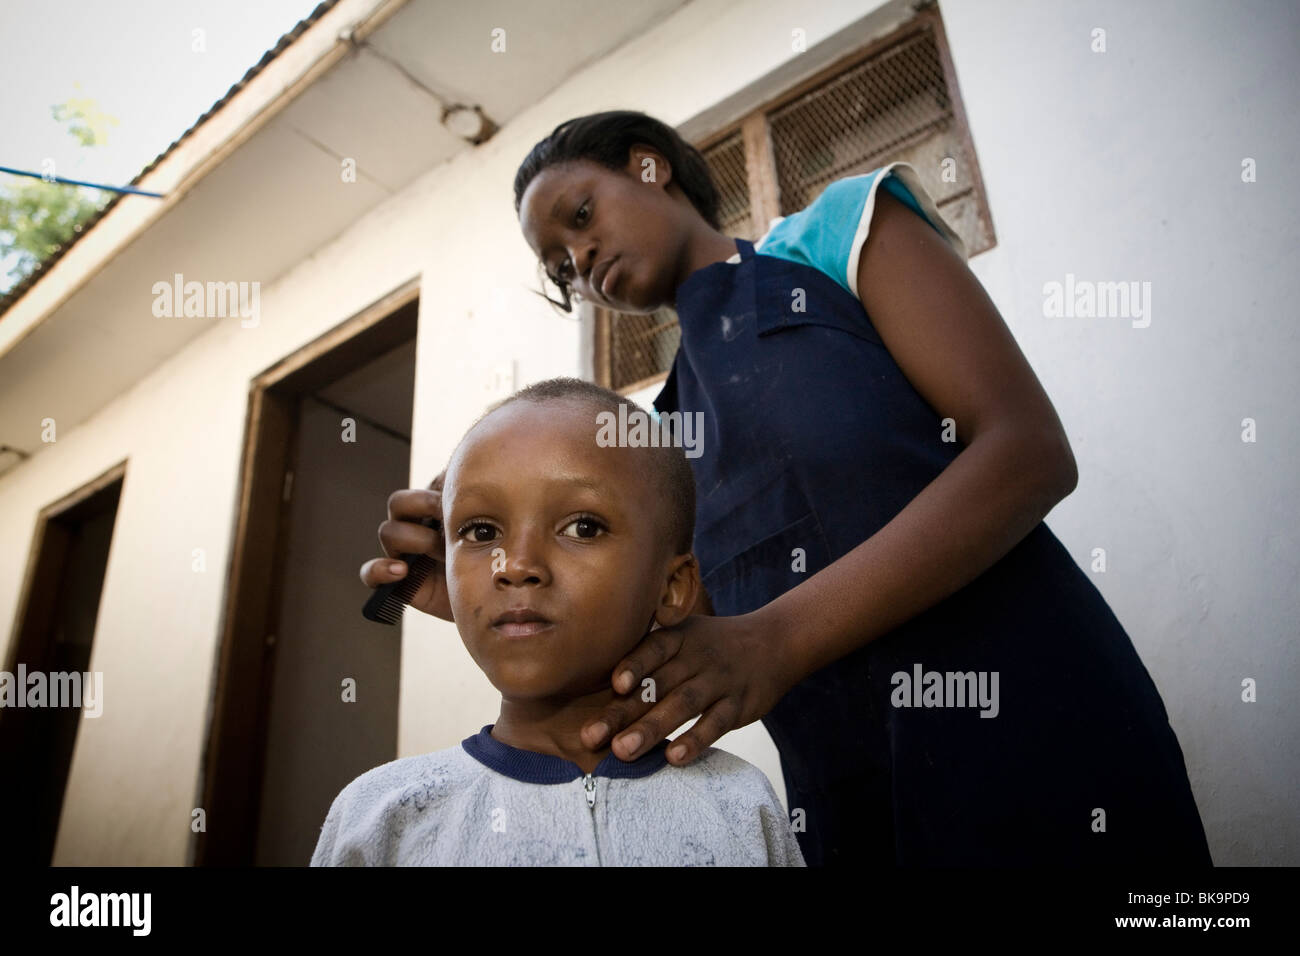 Woman combing a child's hair in an orphanage in Tanzania, East Africa Stock Photo